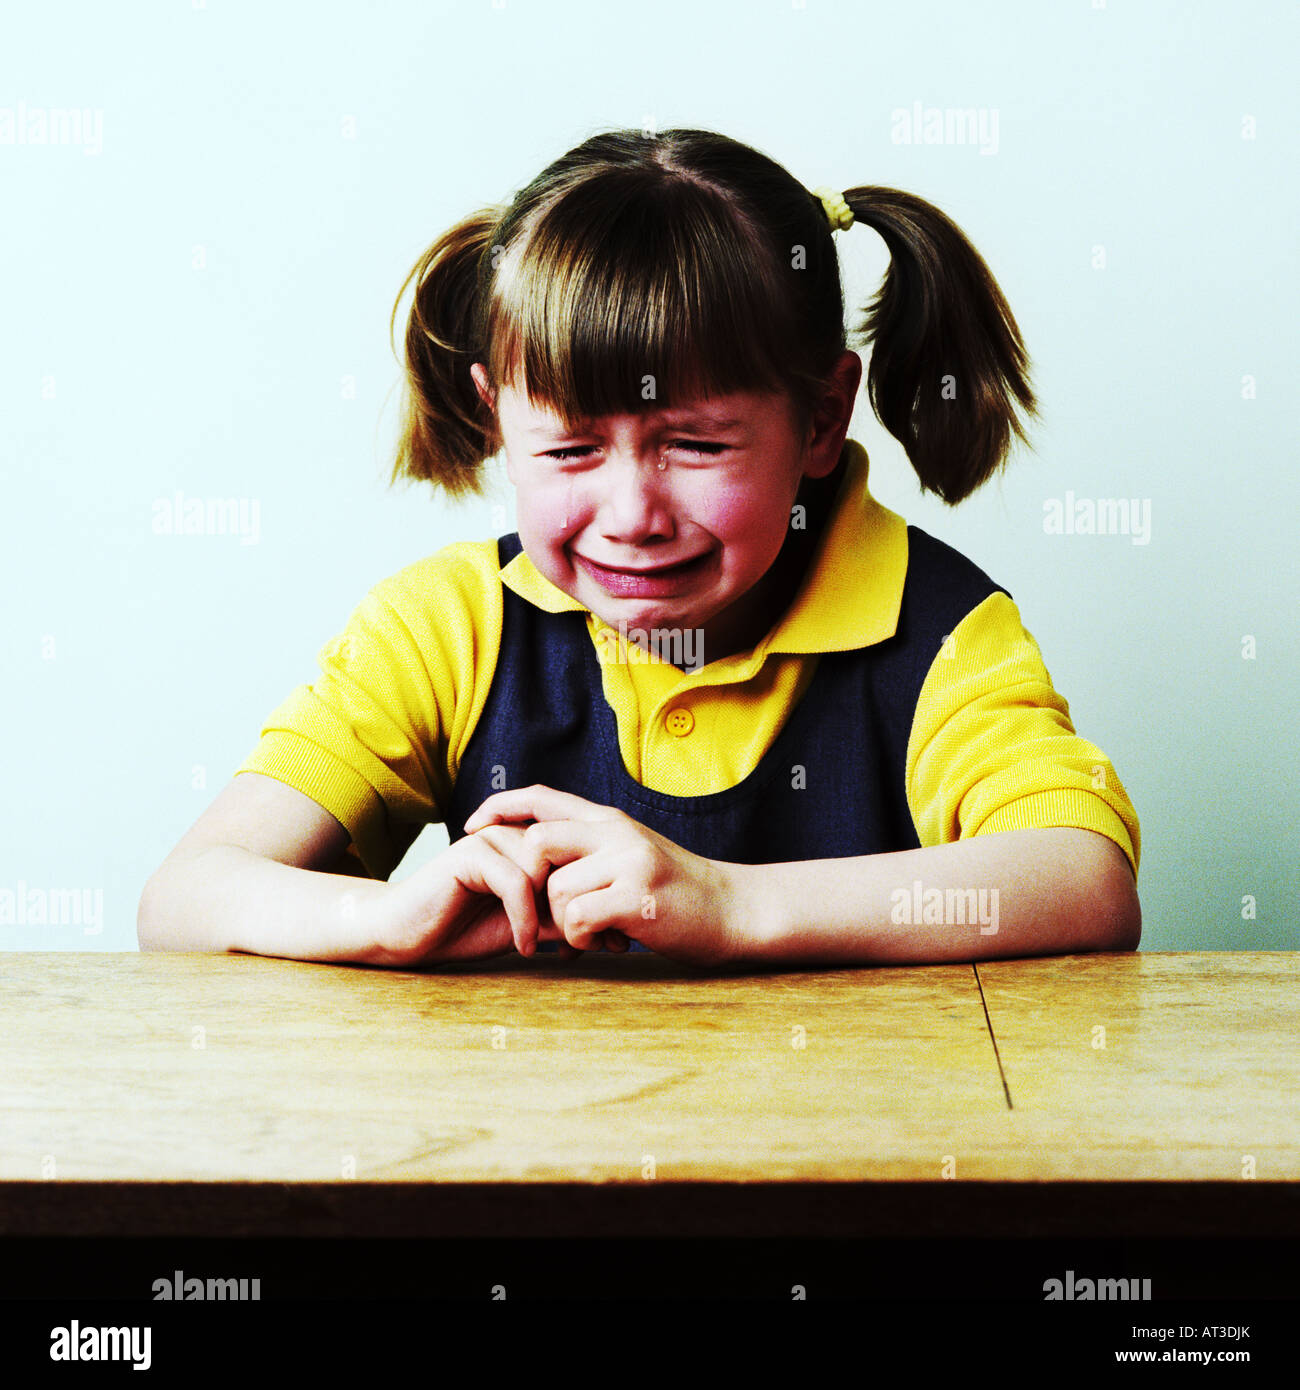 A school girl crying Stock Photo